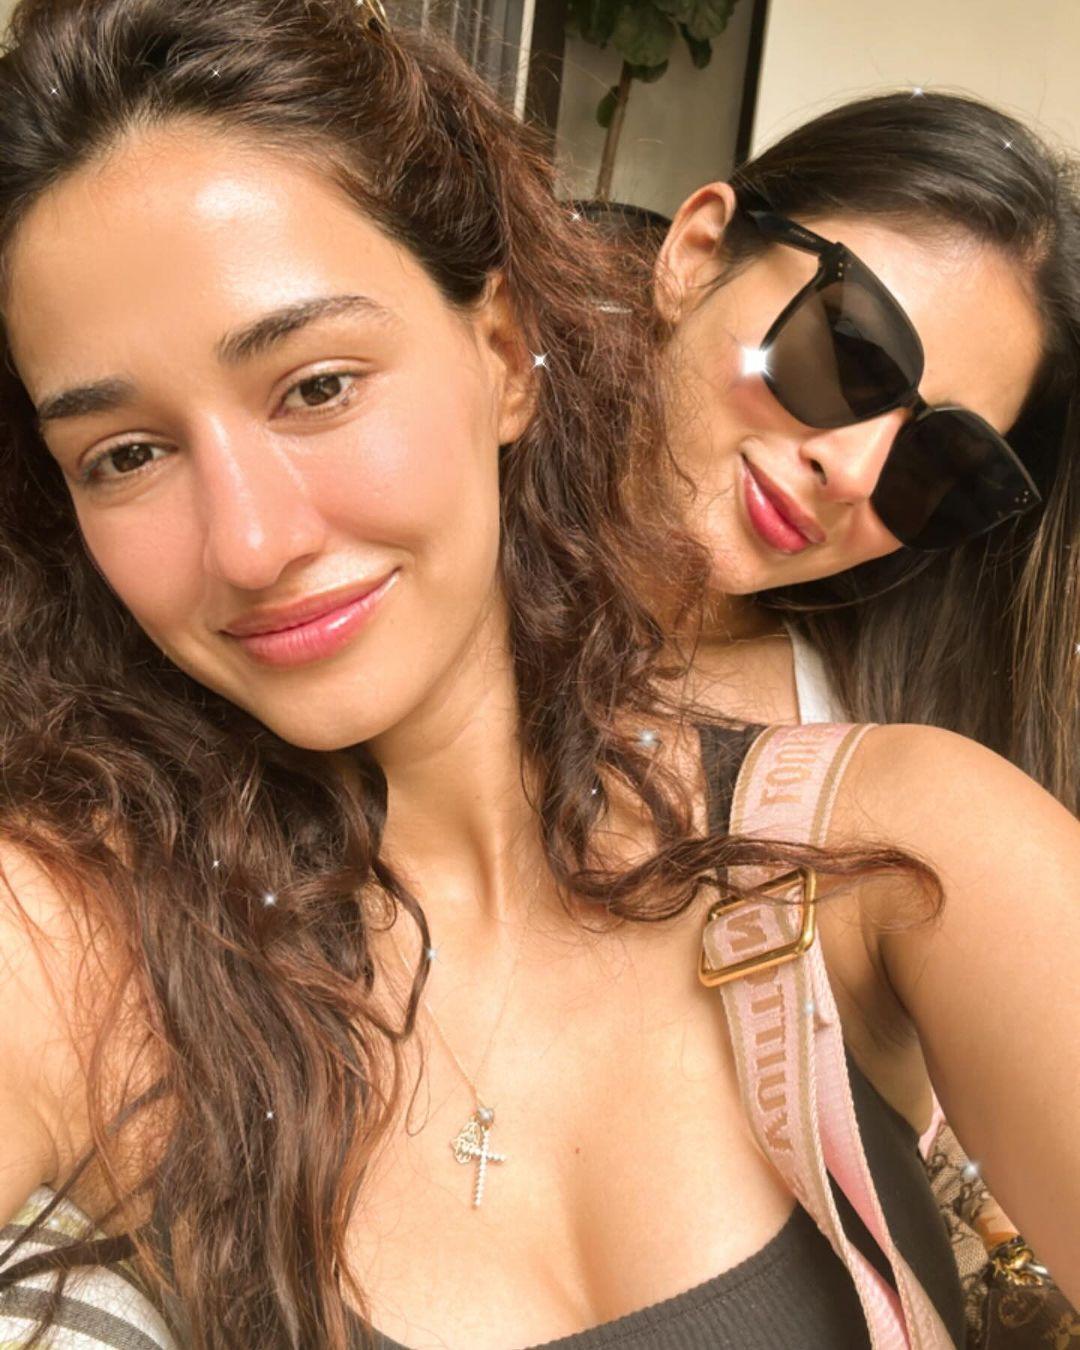 Disha and Mouni seem to have taken countless selfies on the trip, just like and other best friend duo on a trip